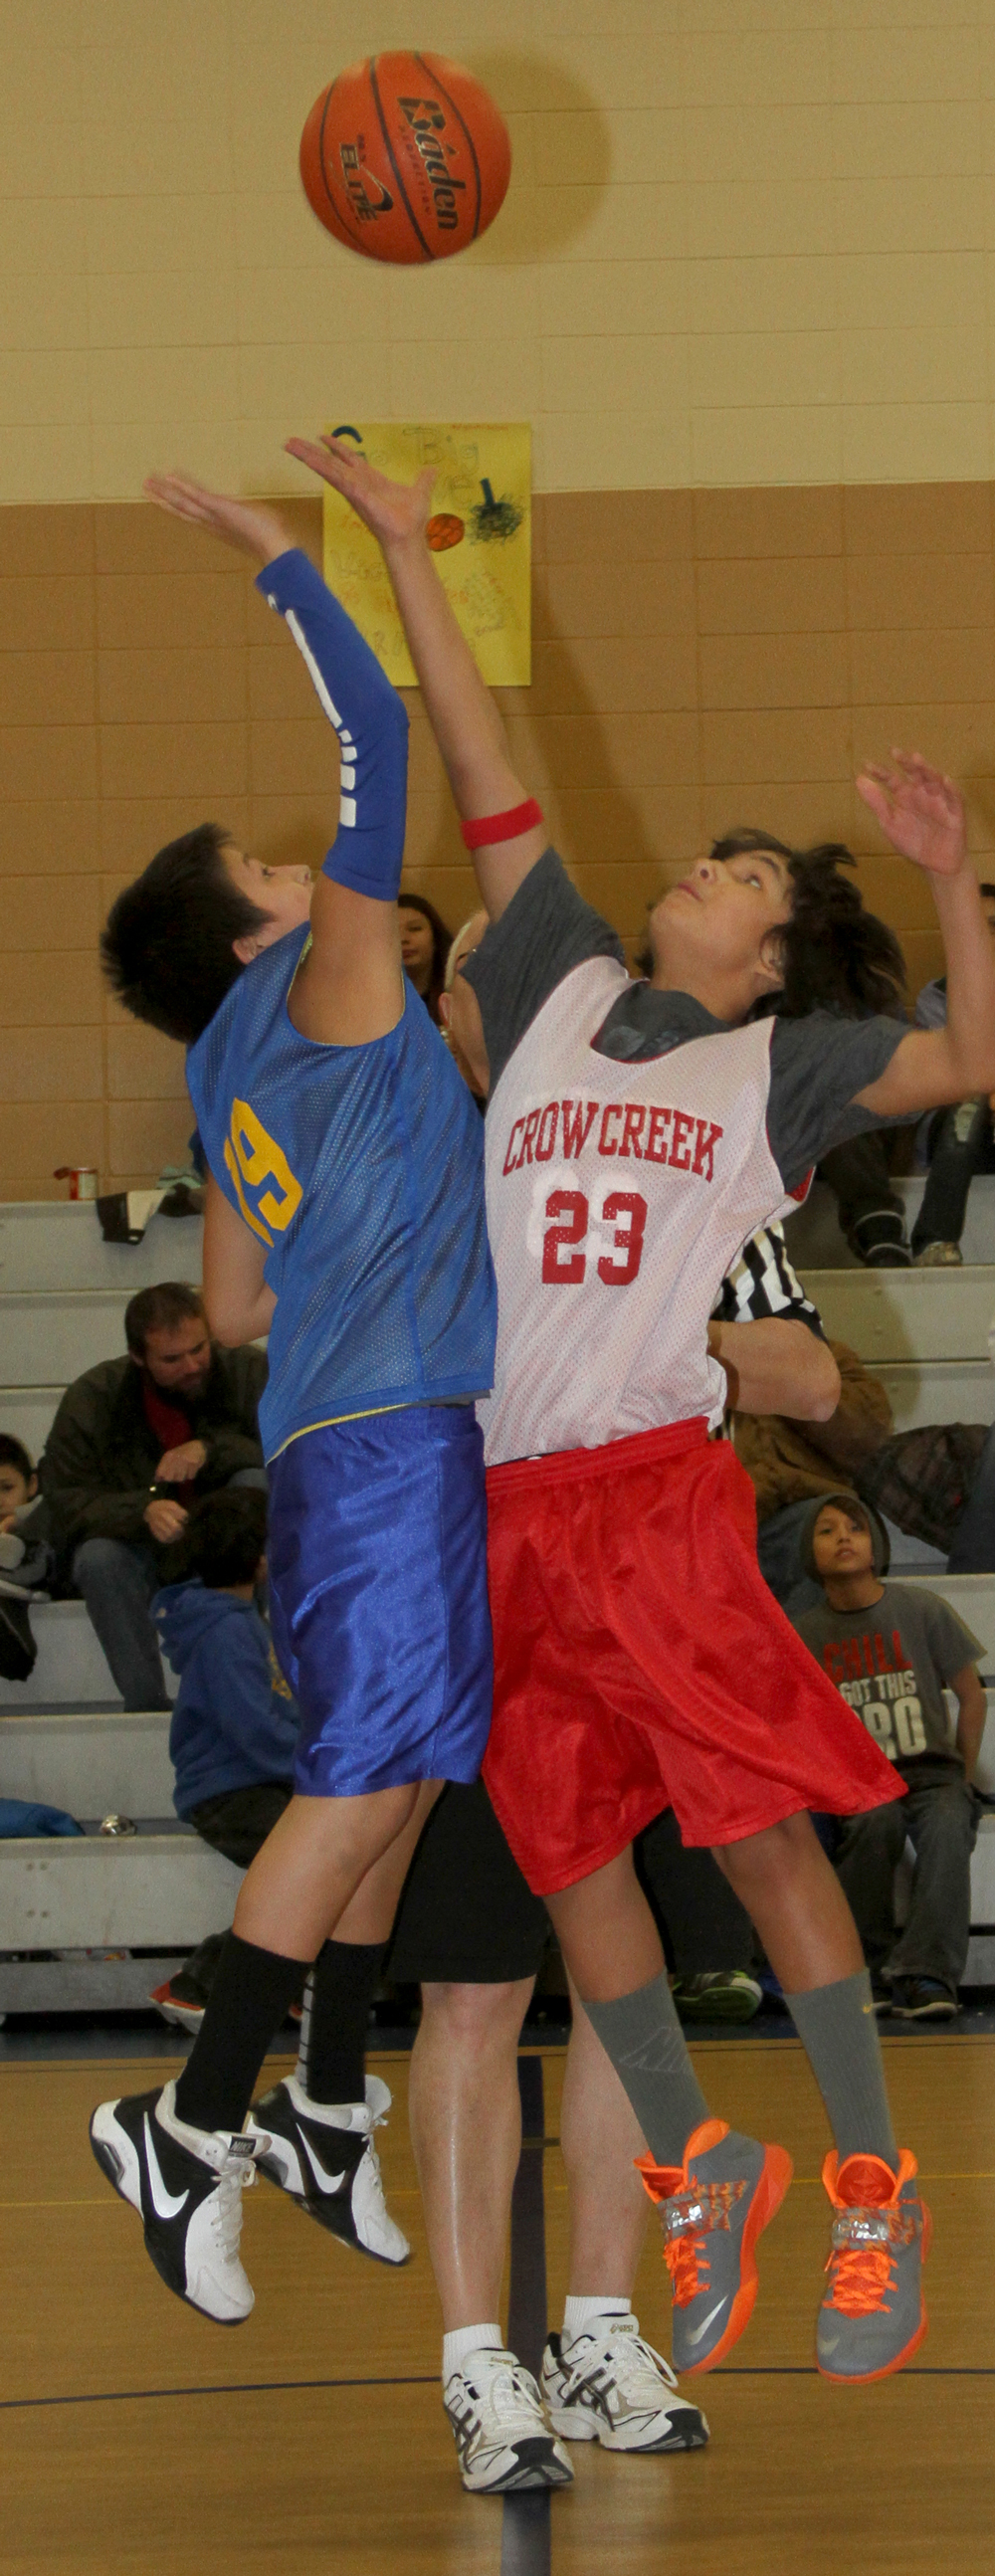 Opposing teams jump for the ball at St. Joseph’s Indian School.